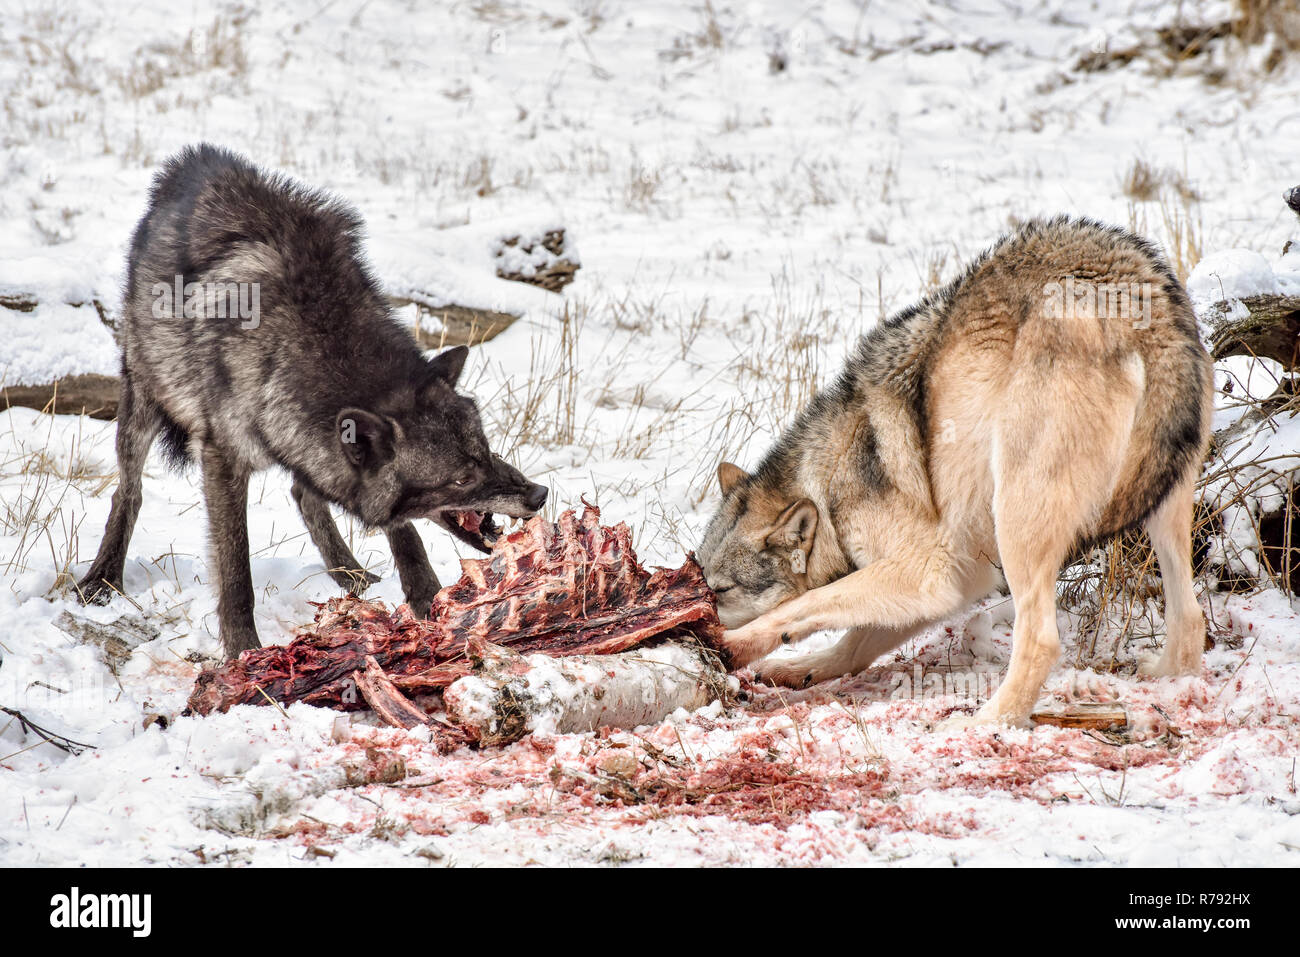 Tundra Wolves Feeding on and Elk Carcass in the Snow Stock Photo